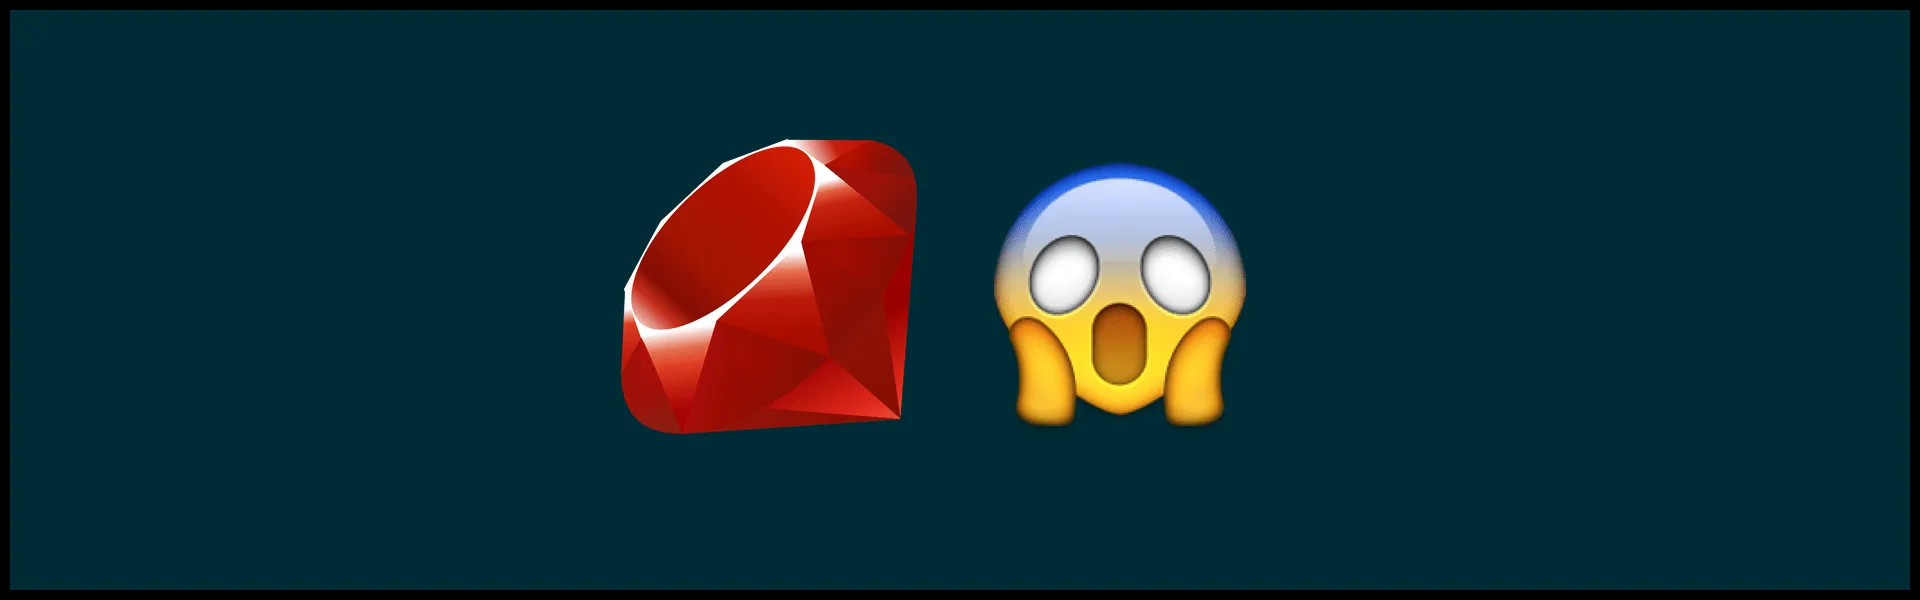 The Ruby logo next to the face screaming in fear emoji